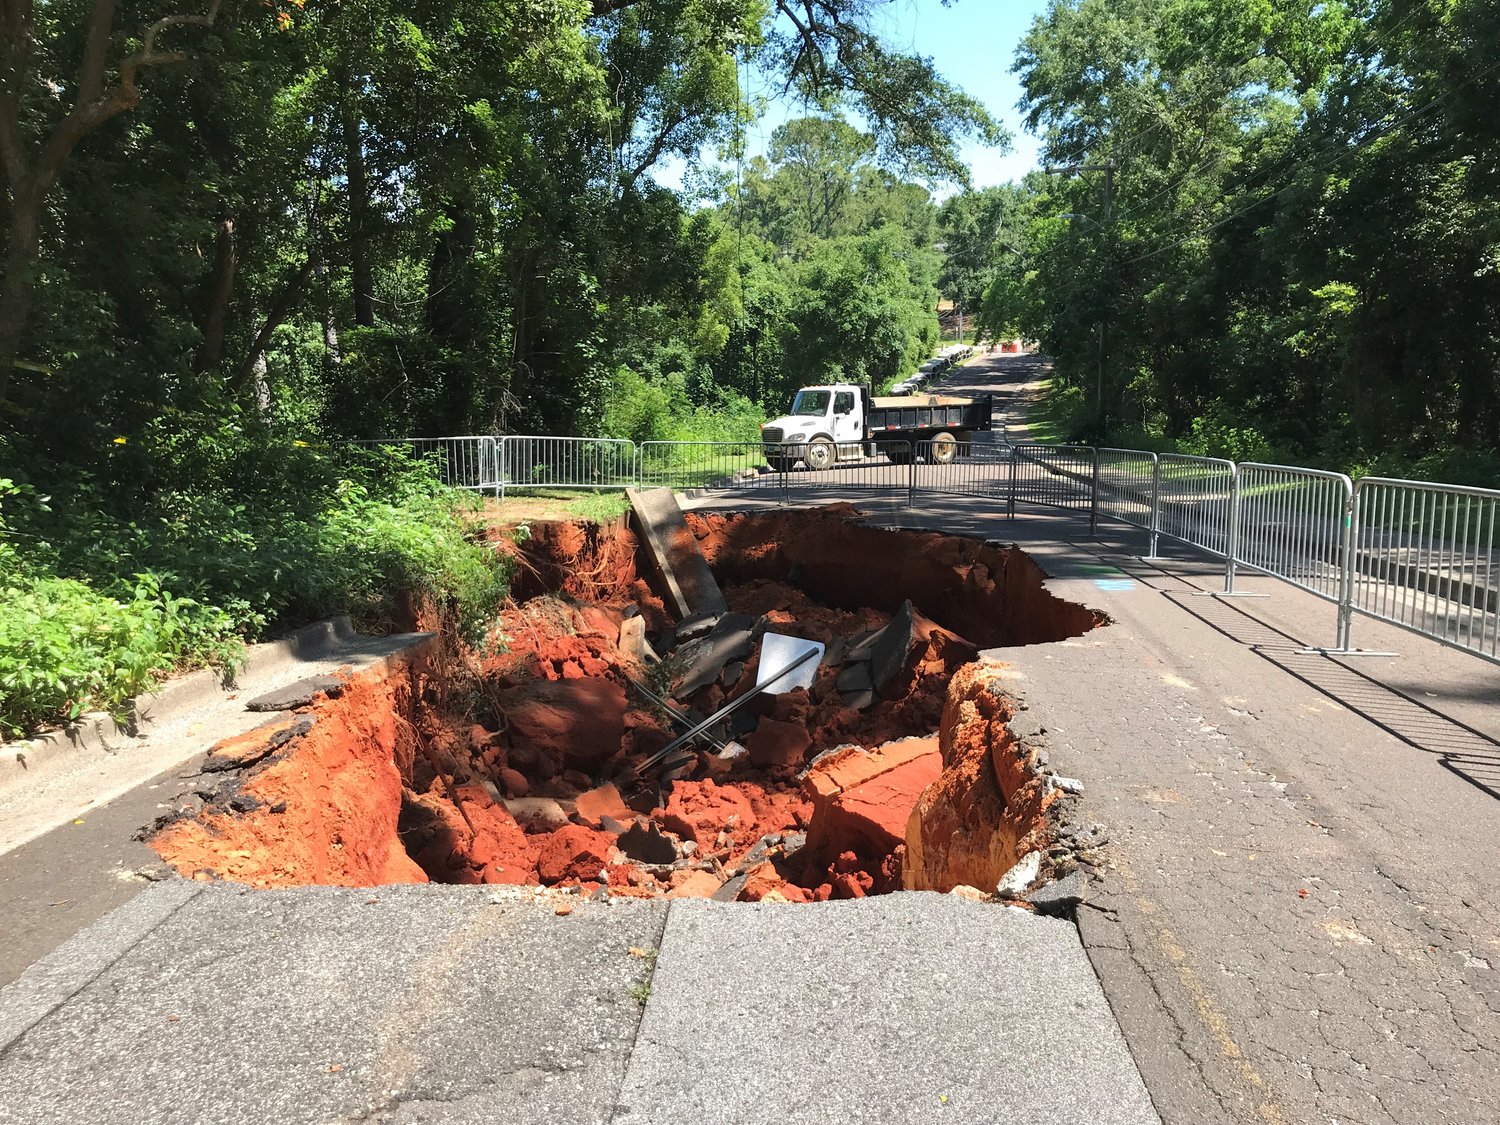 Portions of Bancroft Street collapsed Thursday morning when a sinkhole 85 feet long and 13 feet deep appeared on the street between the Eastern Shore Arts Center and Fairhope West Elementary School.